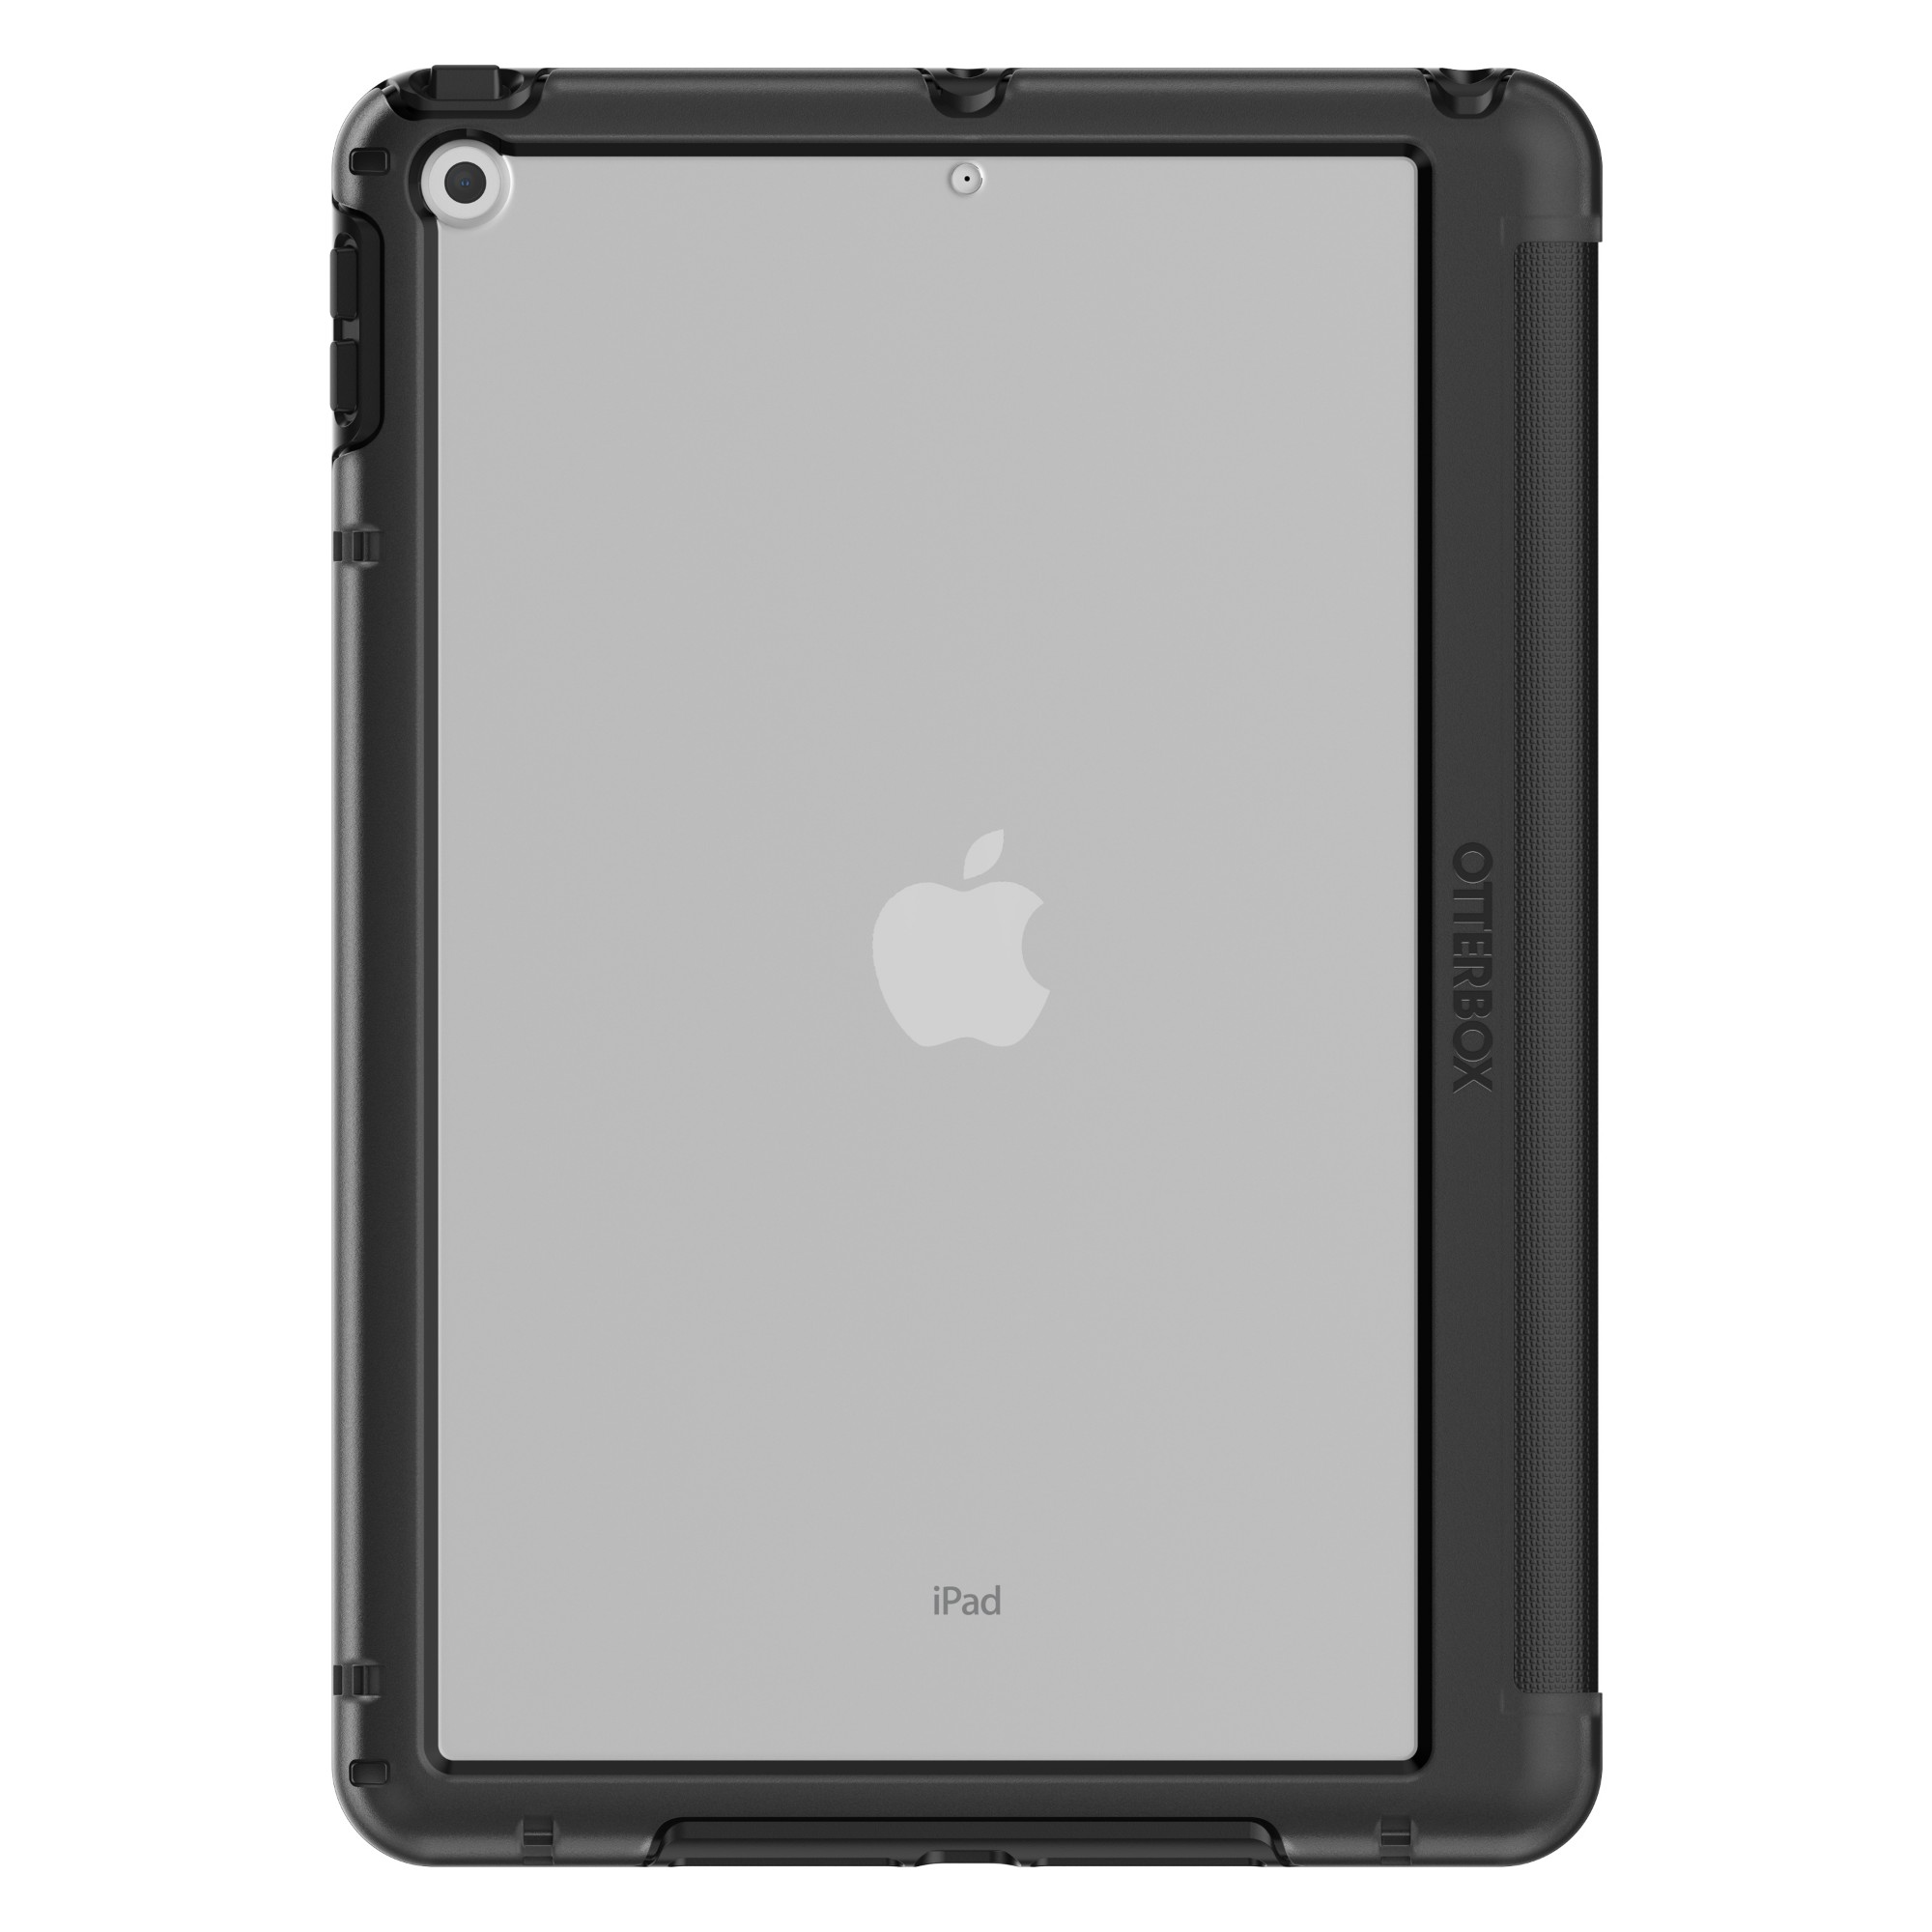 OtterBox Symmetry Folio Case for iPad 7th/8th/9th gen, Shockproof, Drop proof, Slim Protective Folio Case, Tested to Military Standard, Black, No Retail Packaging